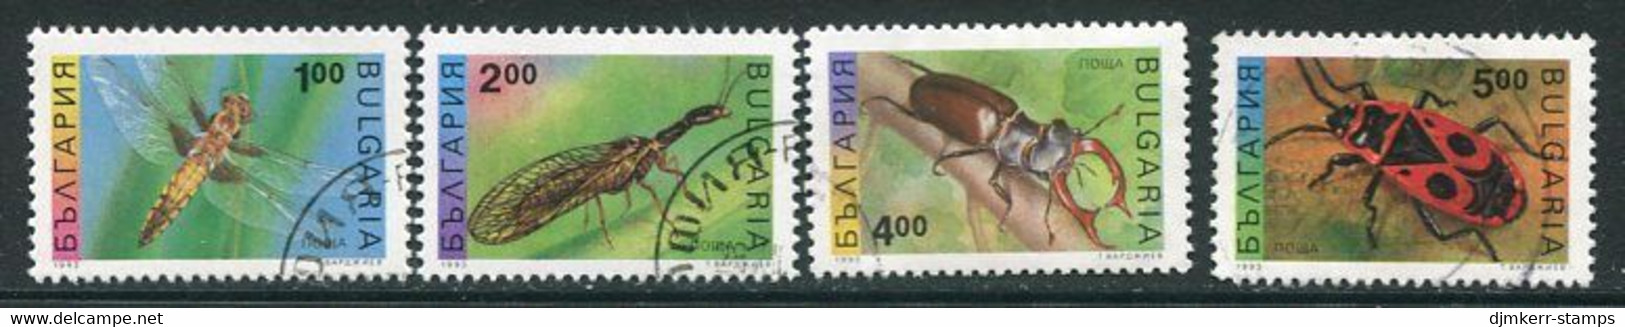 BULGARIA  1993 Defibitive: Insects Used.  Michel 4093-96 - Used Stamps